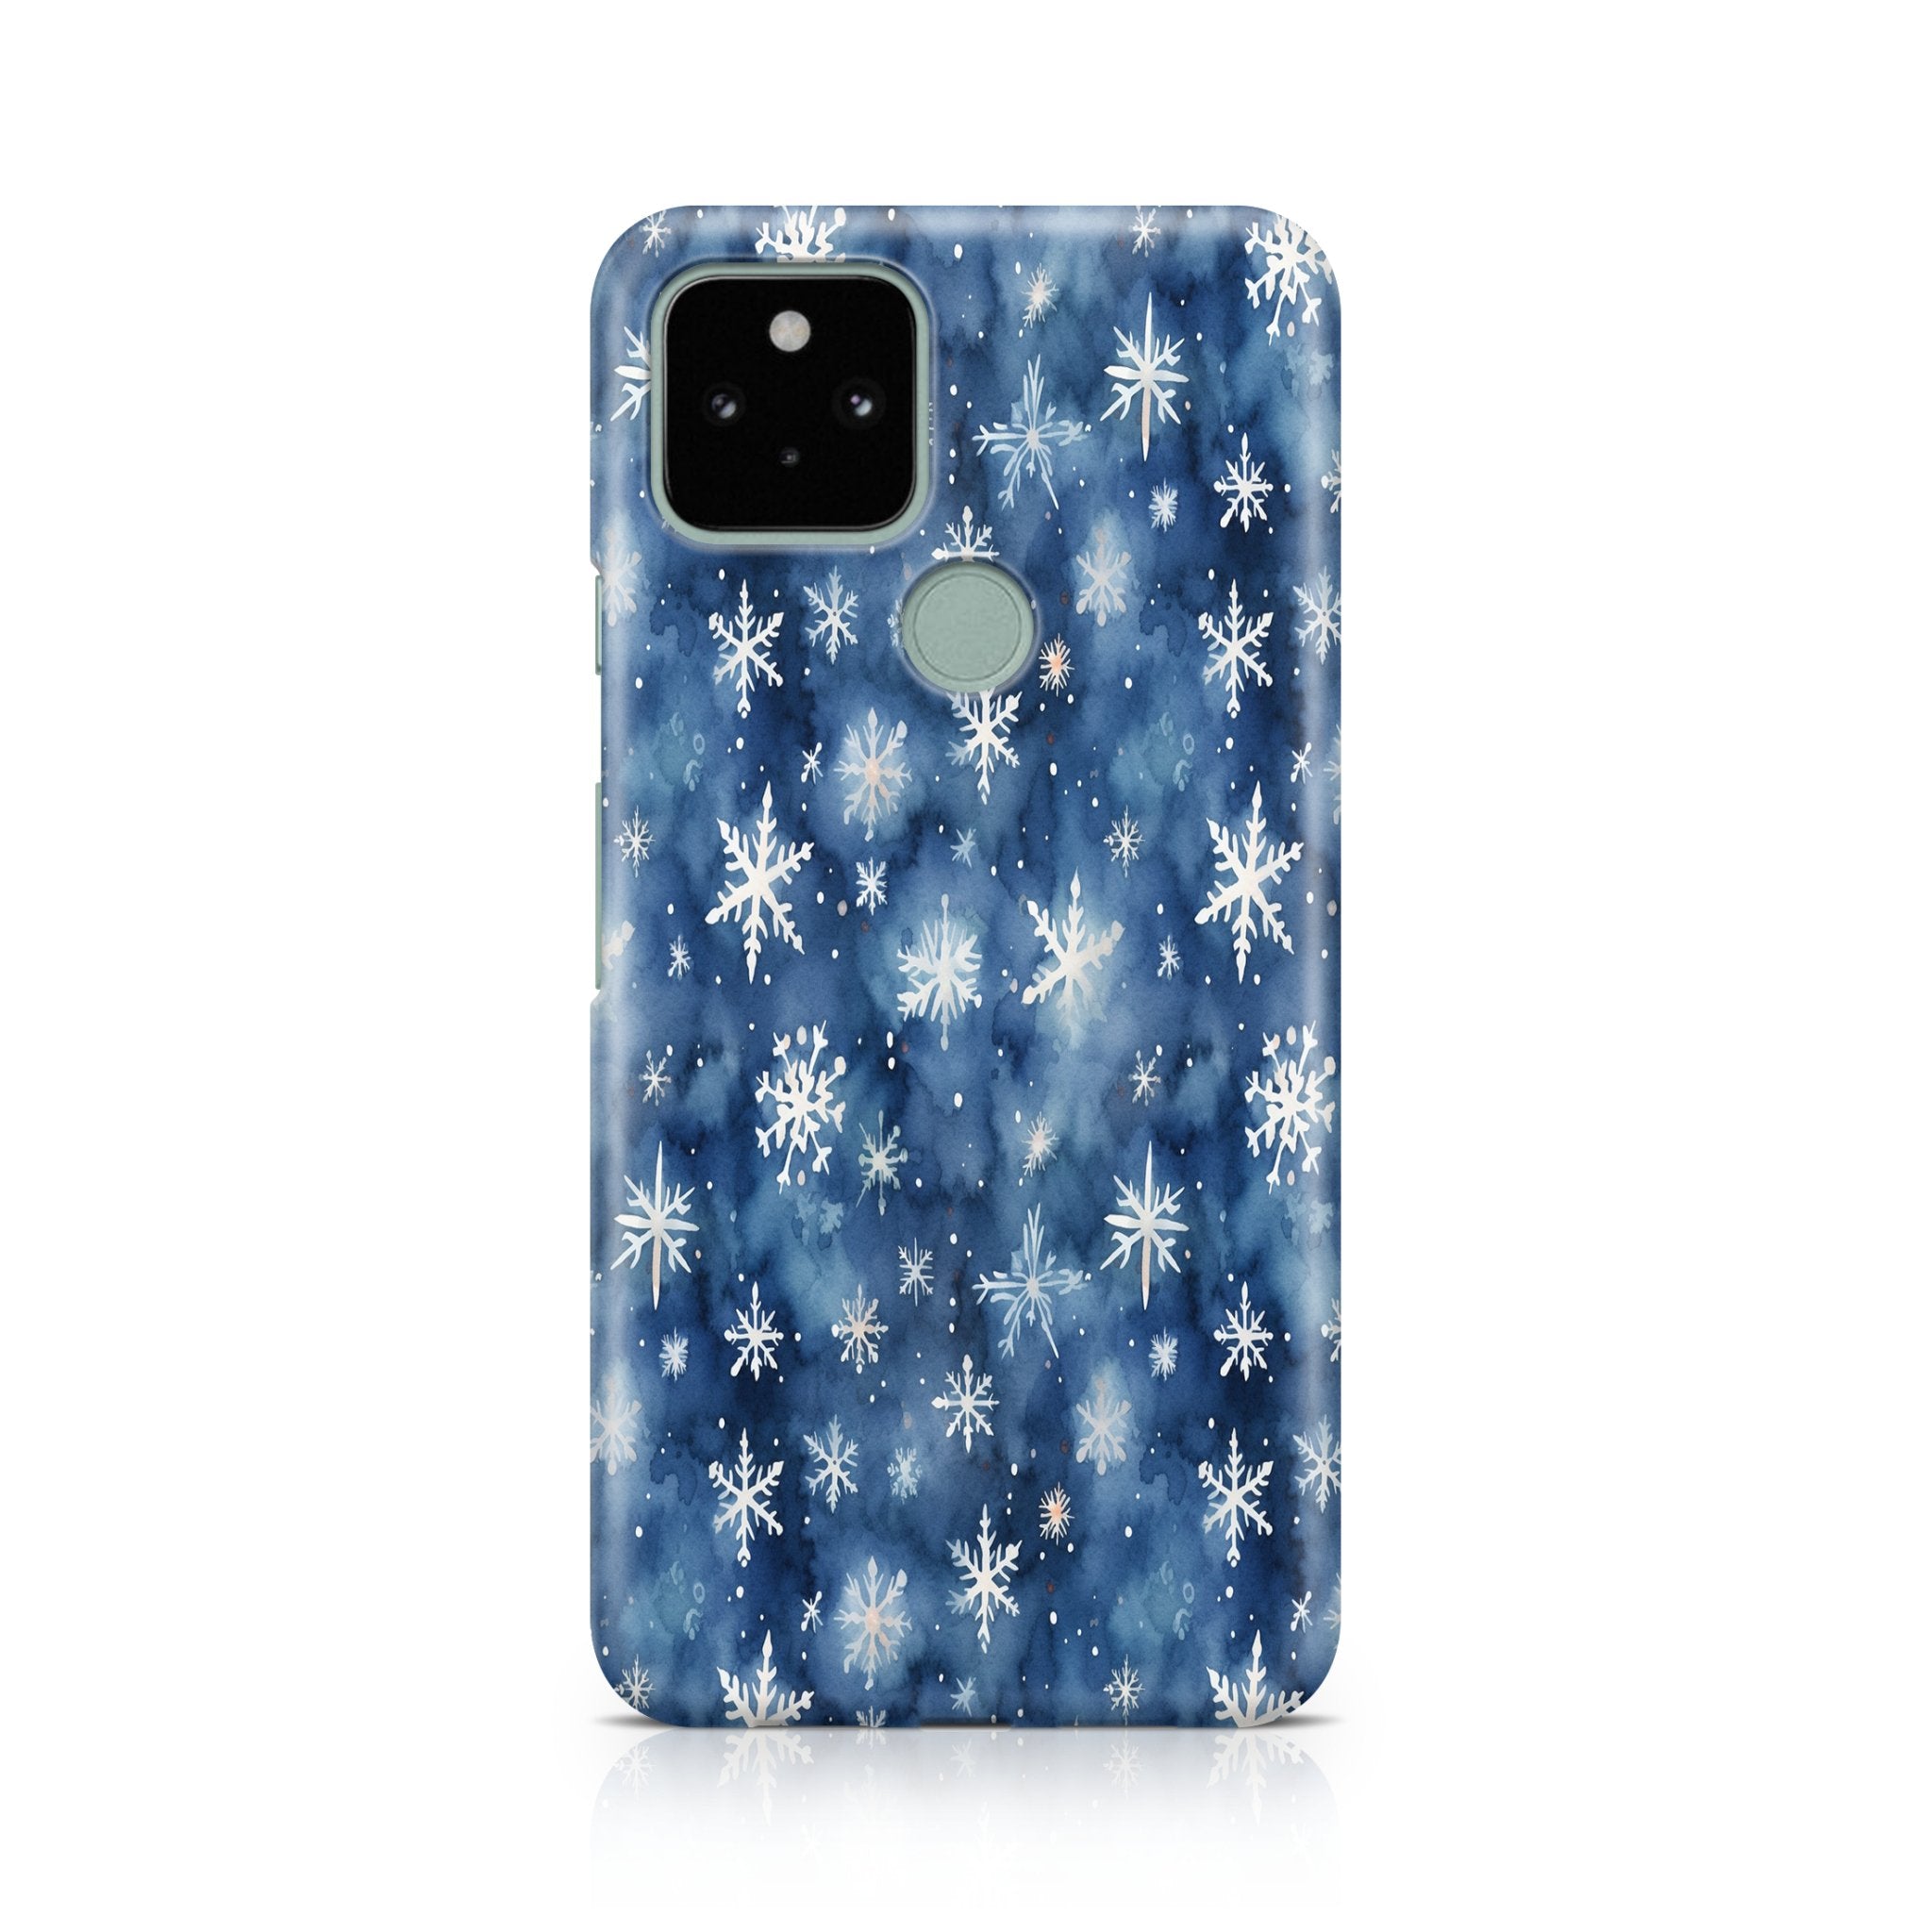 Winter Serenity - Google phone case designs by CaseSwagger